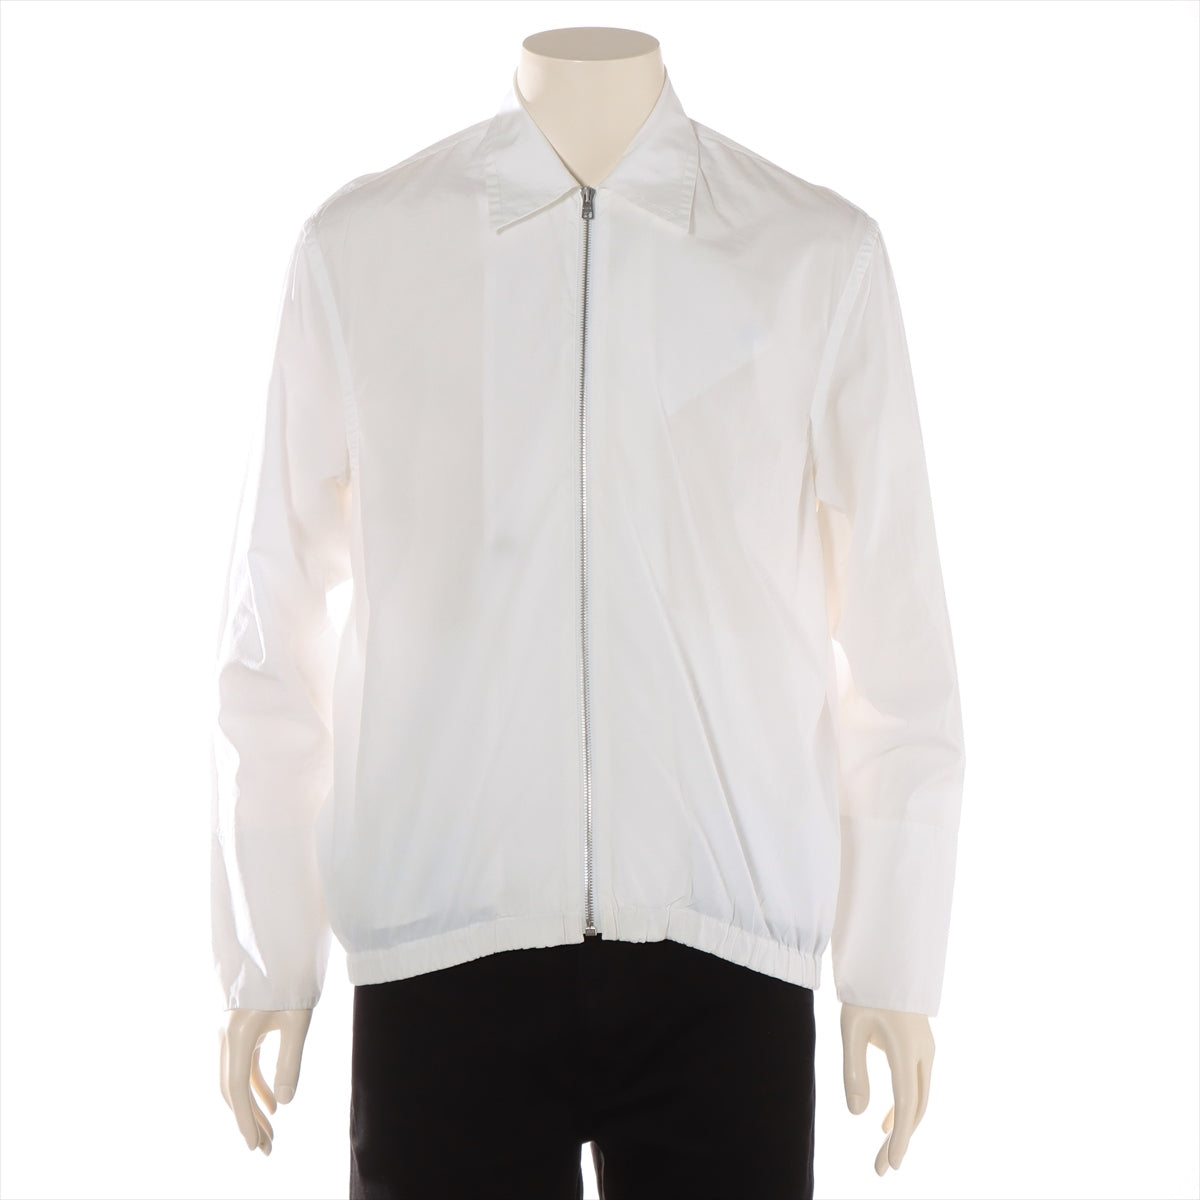 Marni 17AW Cotton Jacket 44 Men's White  M05DL0087 There is a B stamp